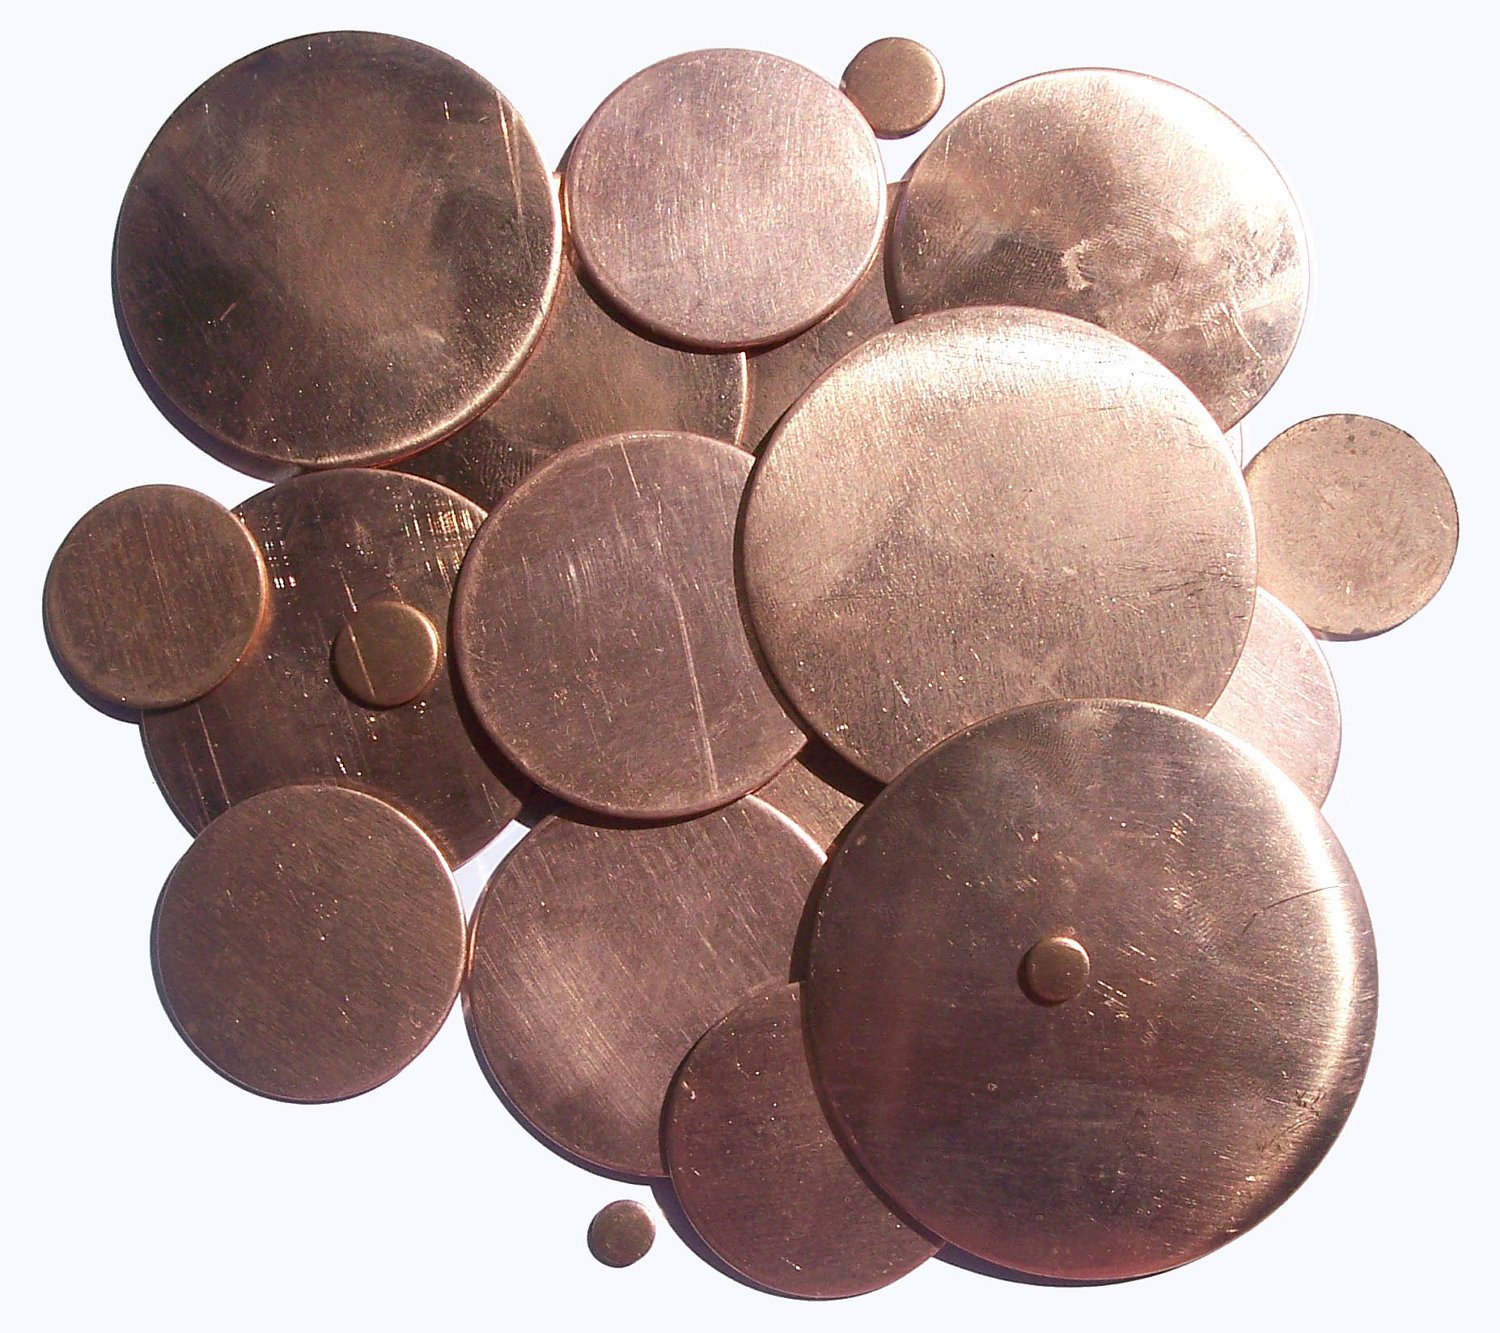 Copper 20mm Blank Disc 24g Enameling Stamping Texturing Blanks - Metalworking Supply - 6 Pieces